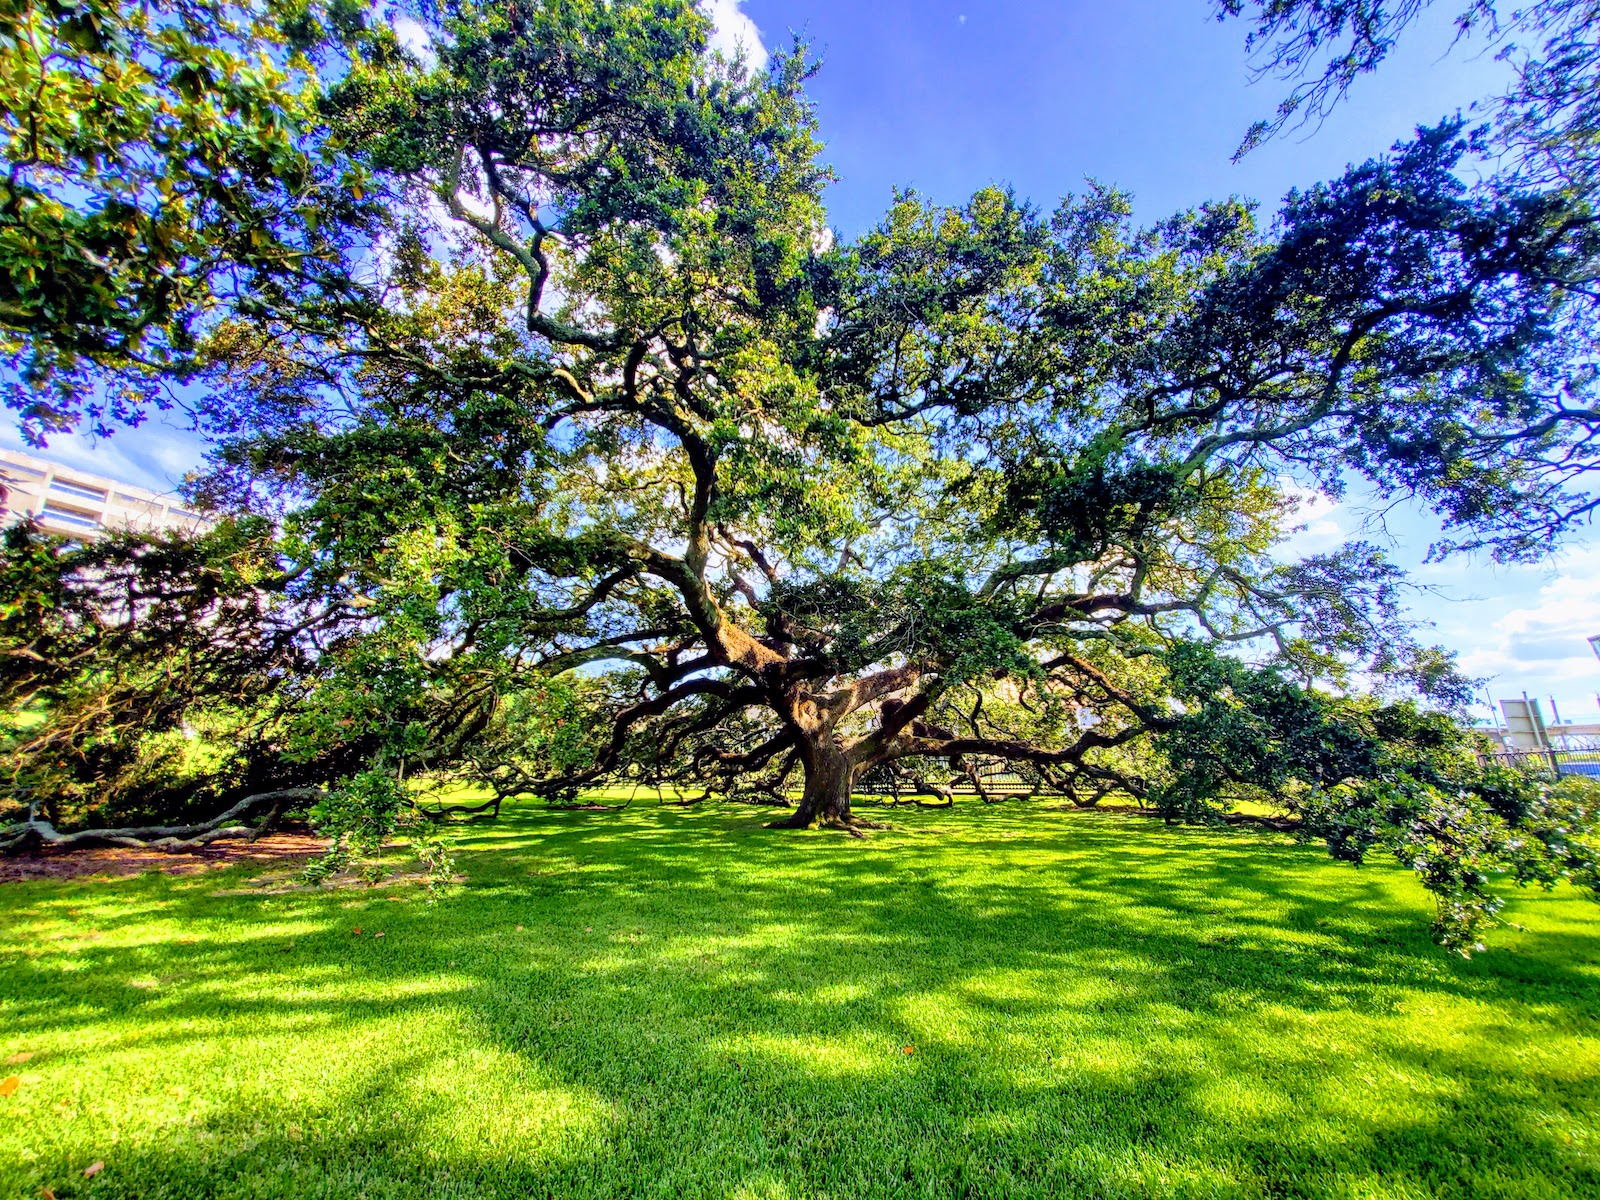 ginormous live oak tree on the grounds of the Old State Capitol building in Baton Rouge, Louisiana